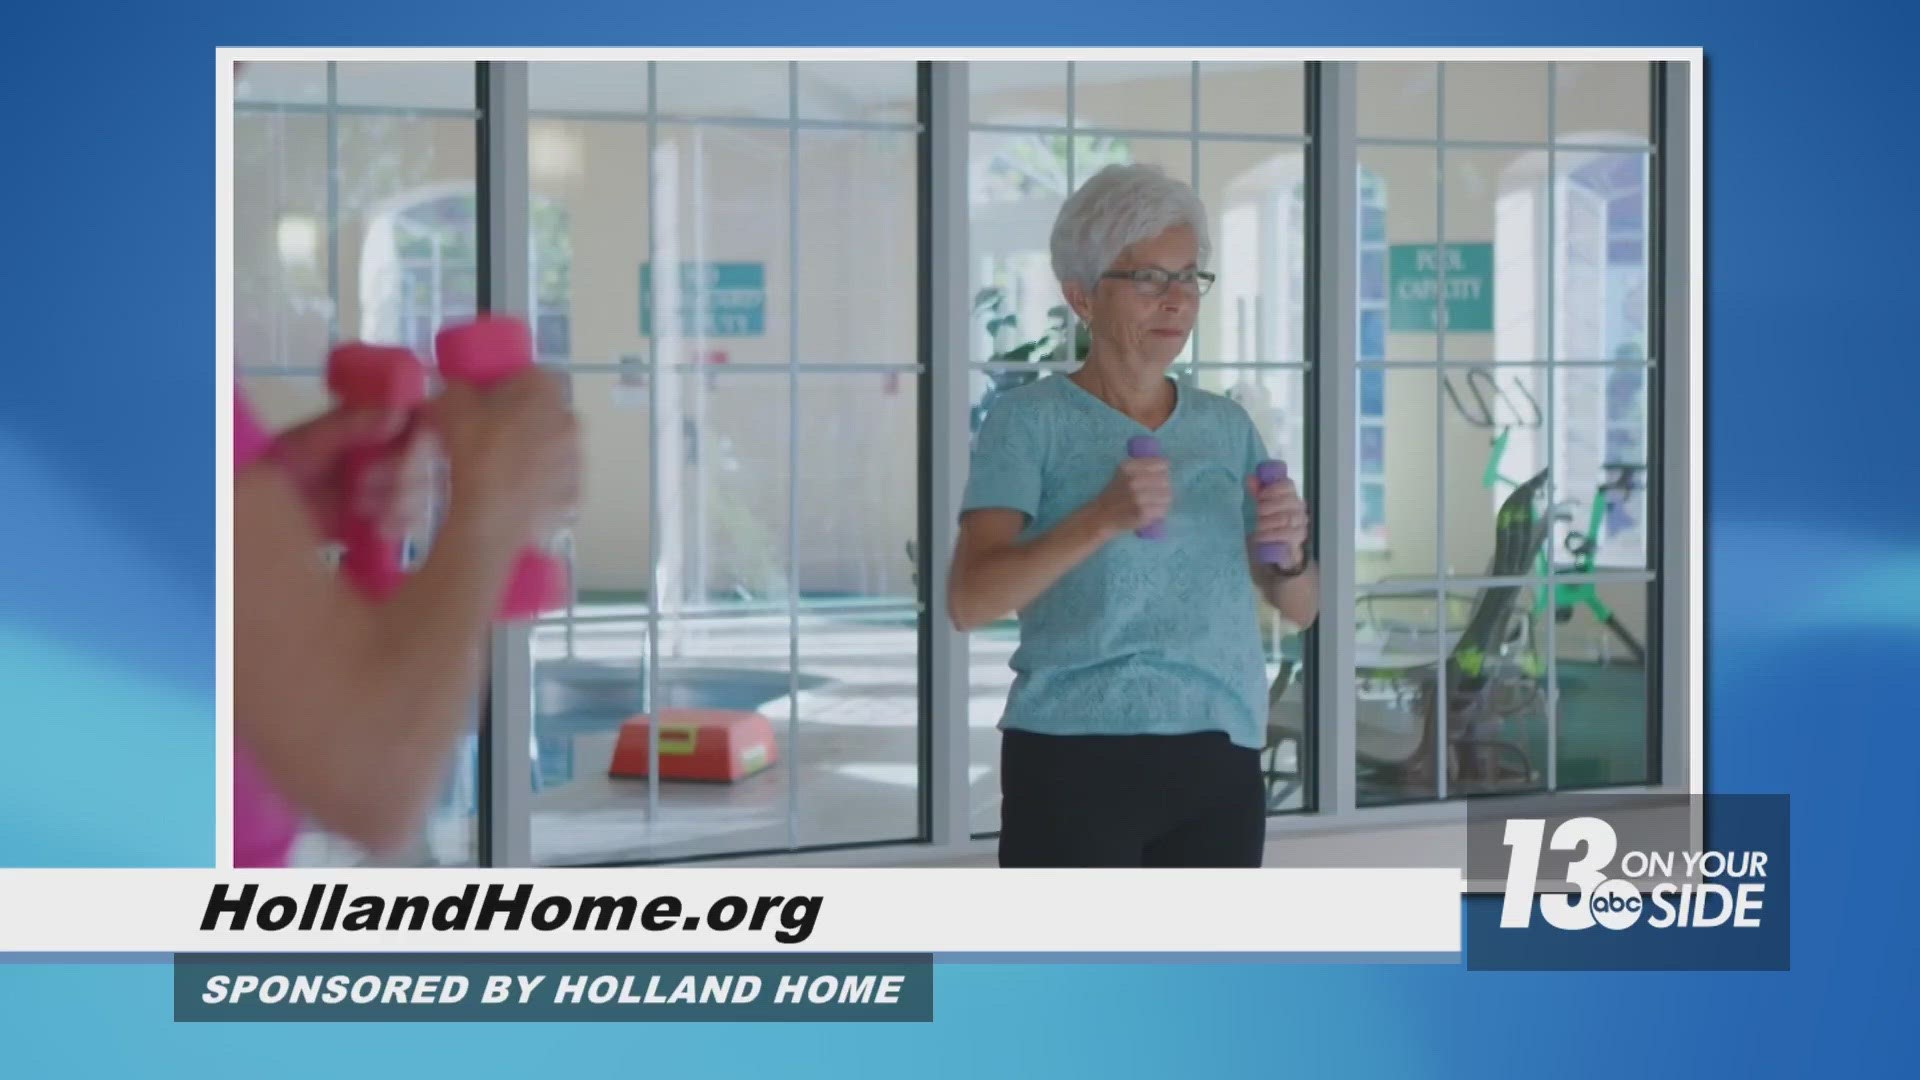 Since 1892, Holland Home has been caring for area seniors, whatever their needs or lifestyle choices demand.